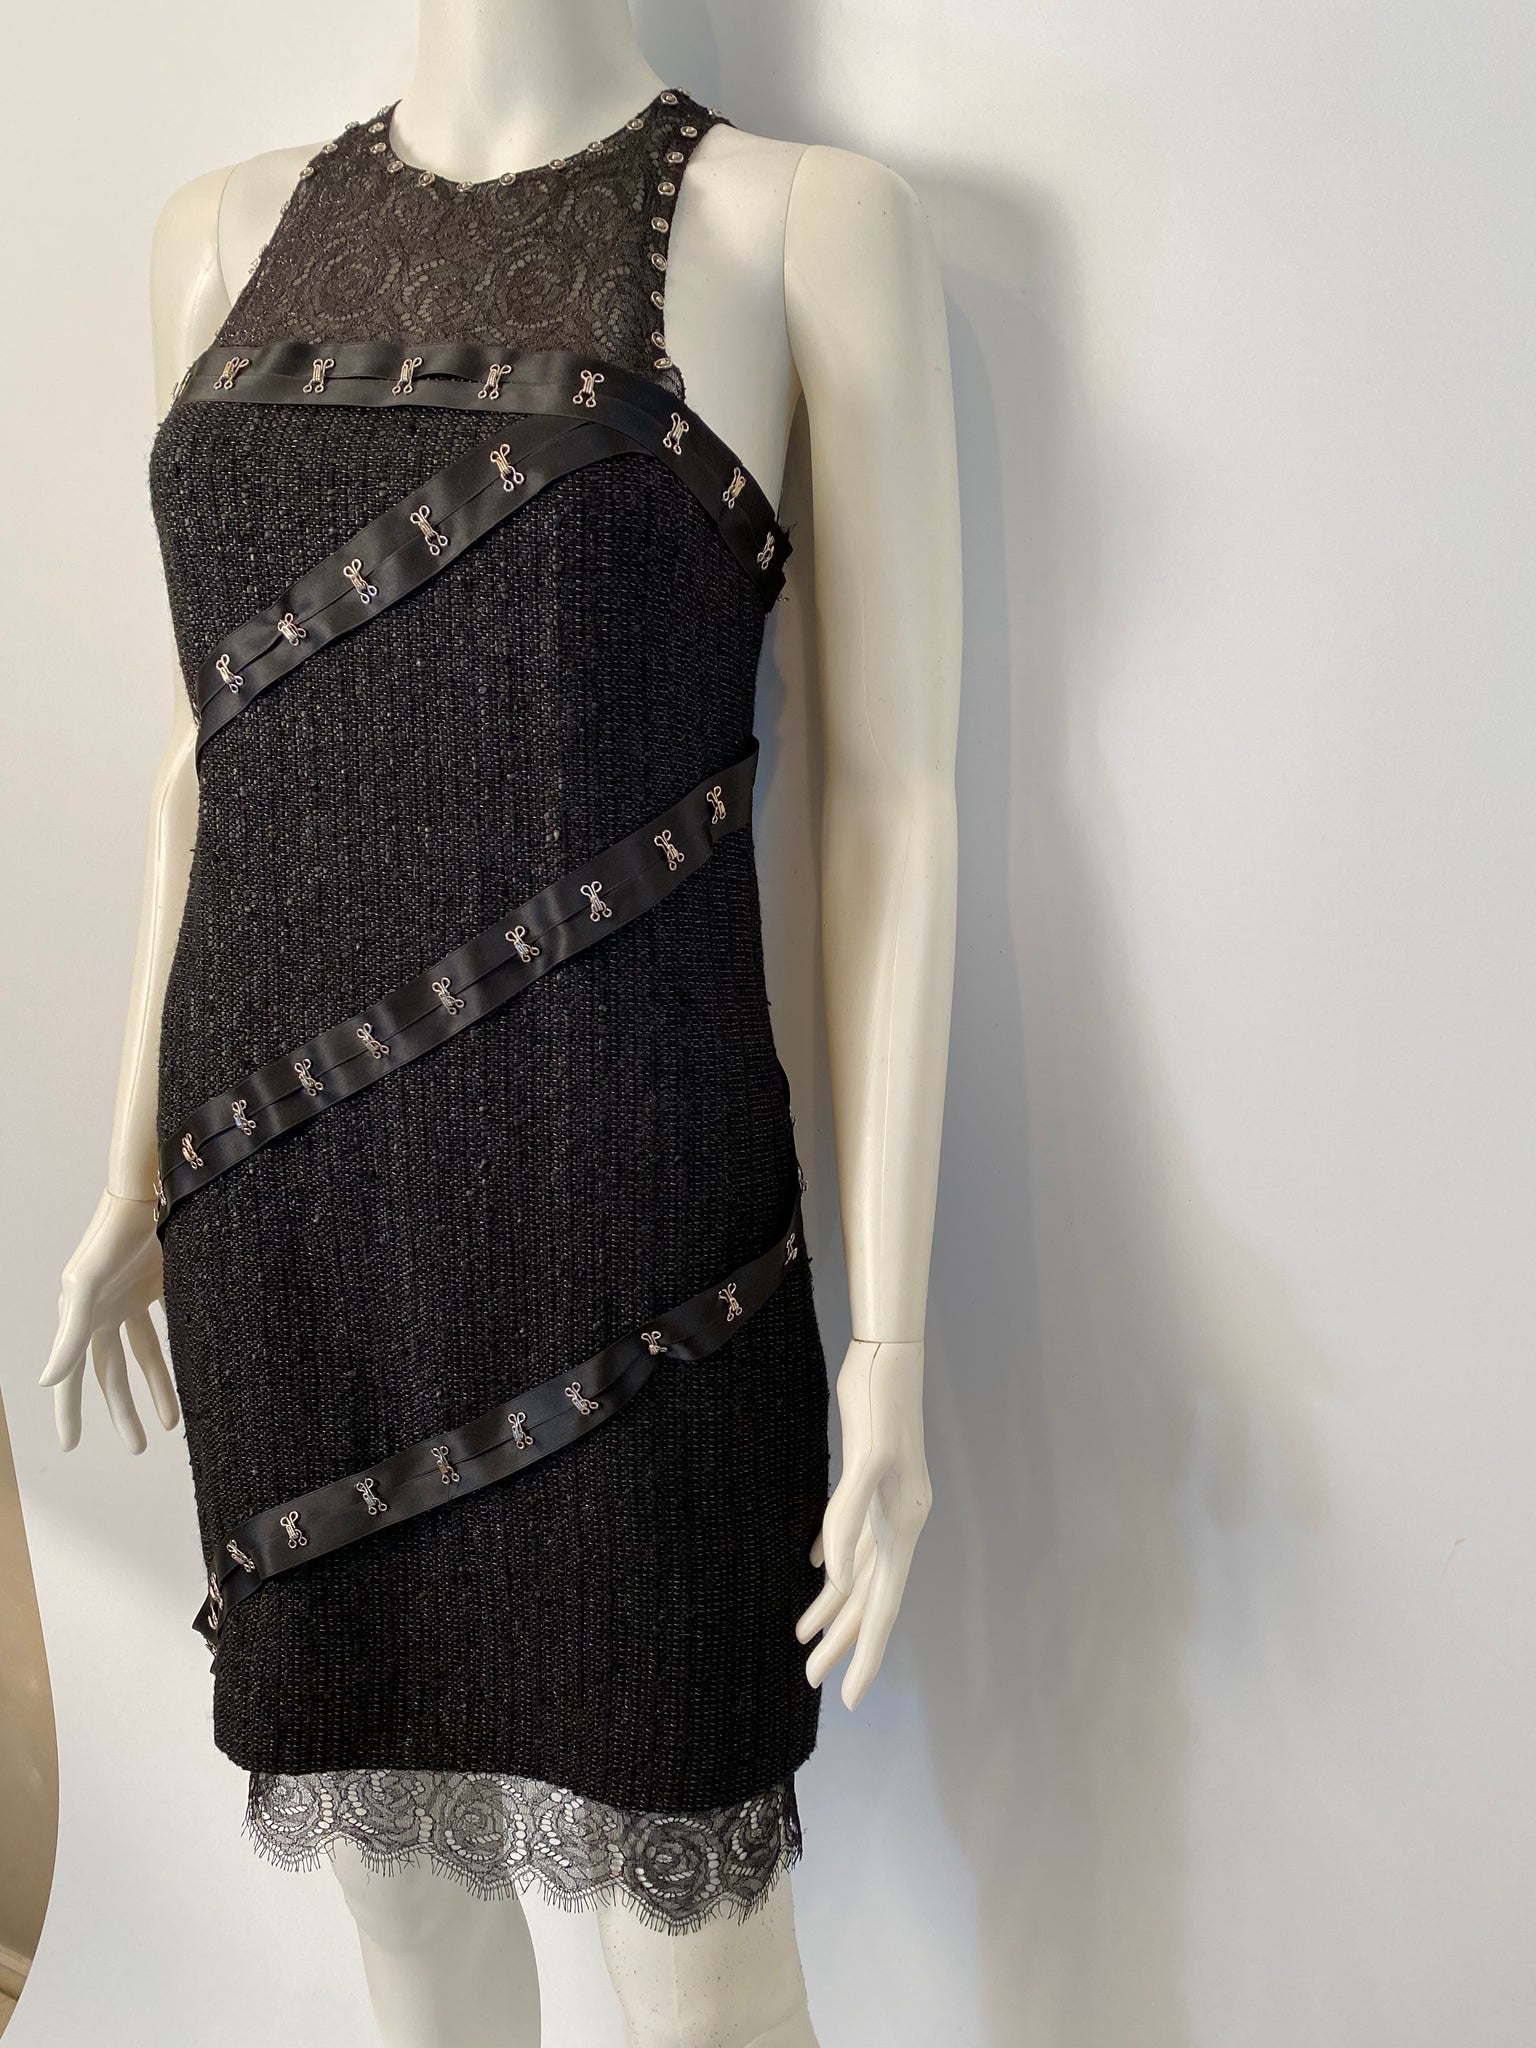 HelensChanel Vintage Chanel 03A, 2003 Fall Snap Collection Black Mini Dress Top Tunic FR 38 US 2/4